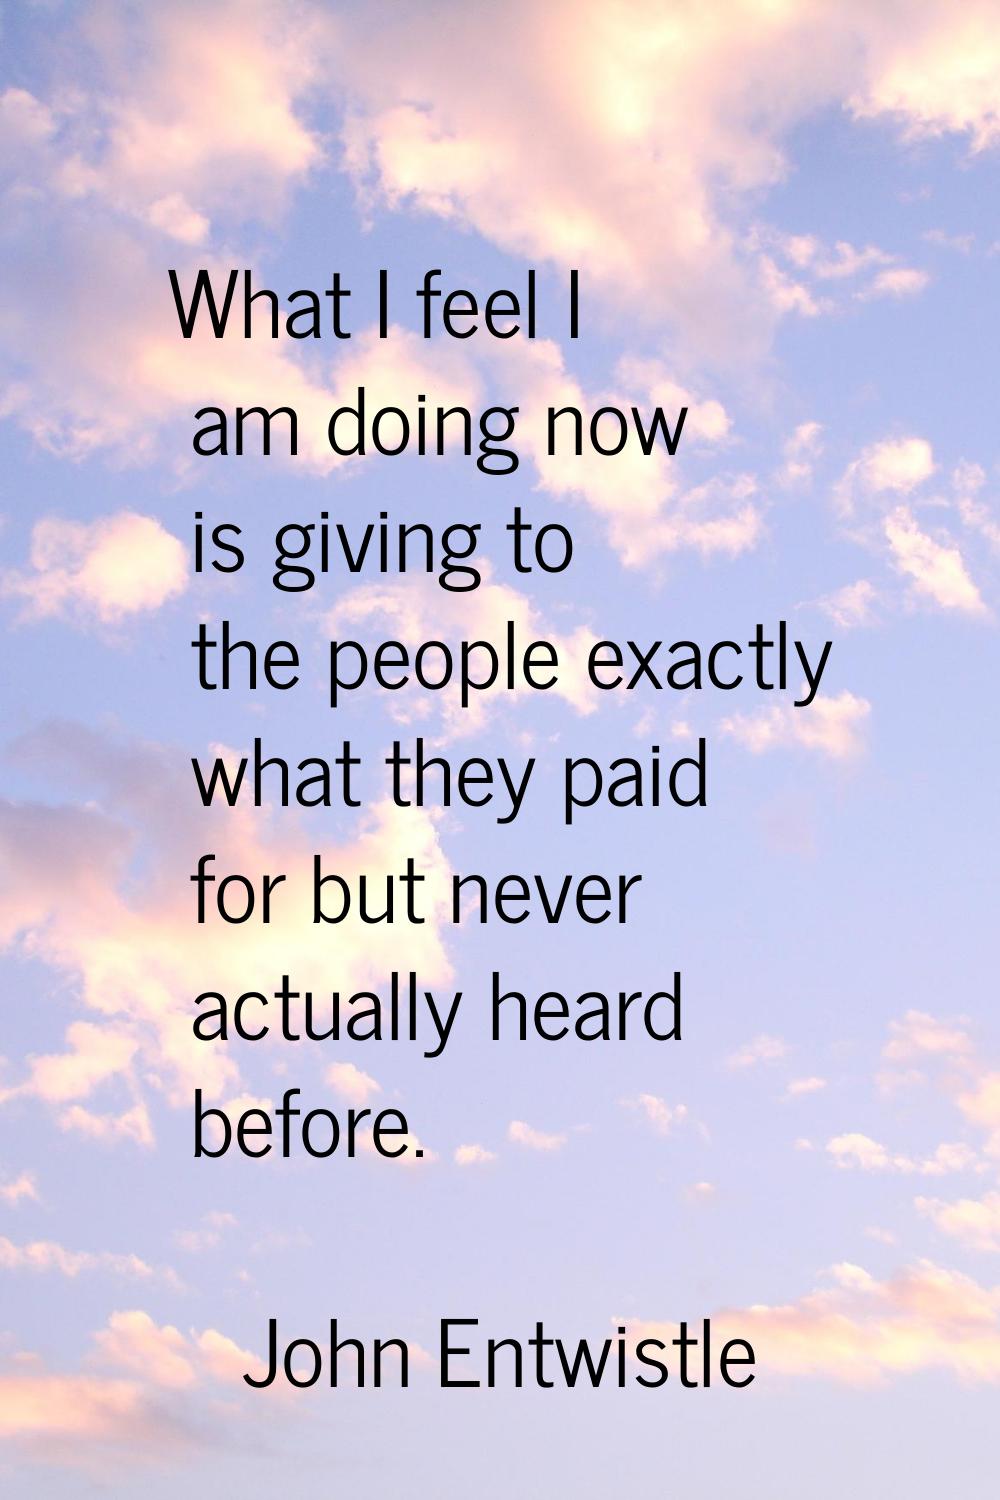 What I feel I am doing now is giving to the people exactly what they paid for but never actually he